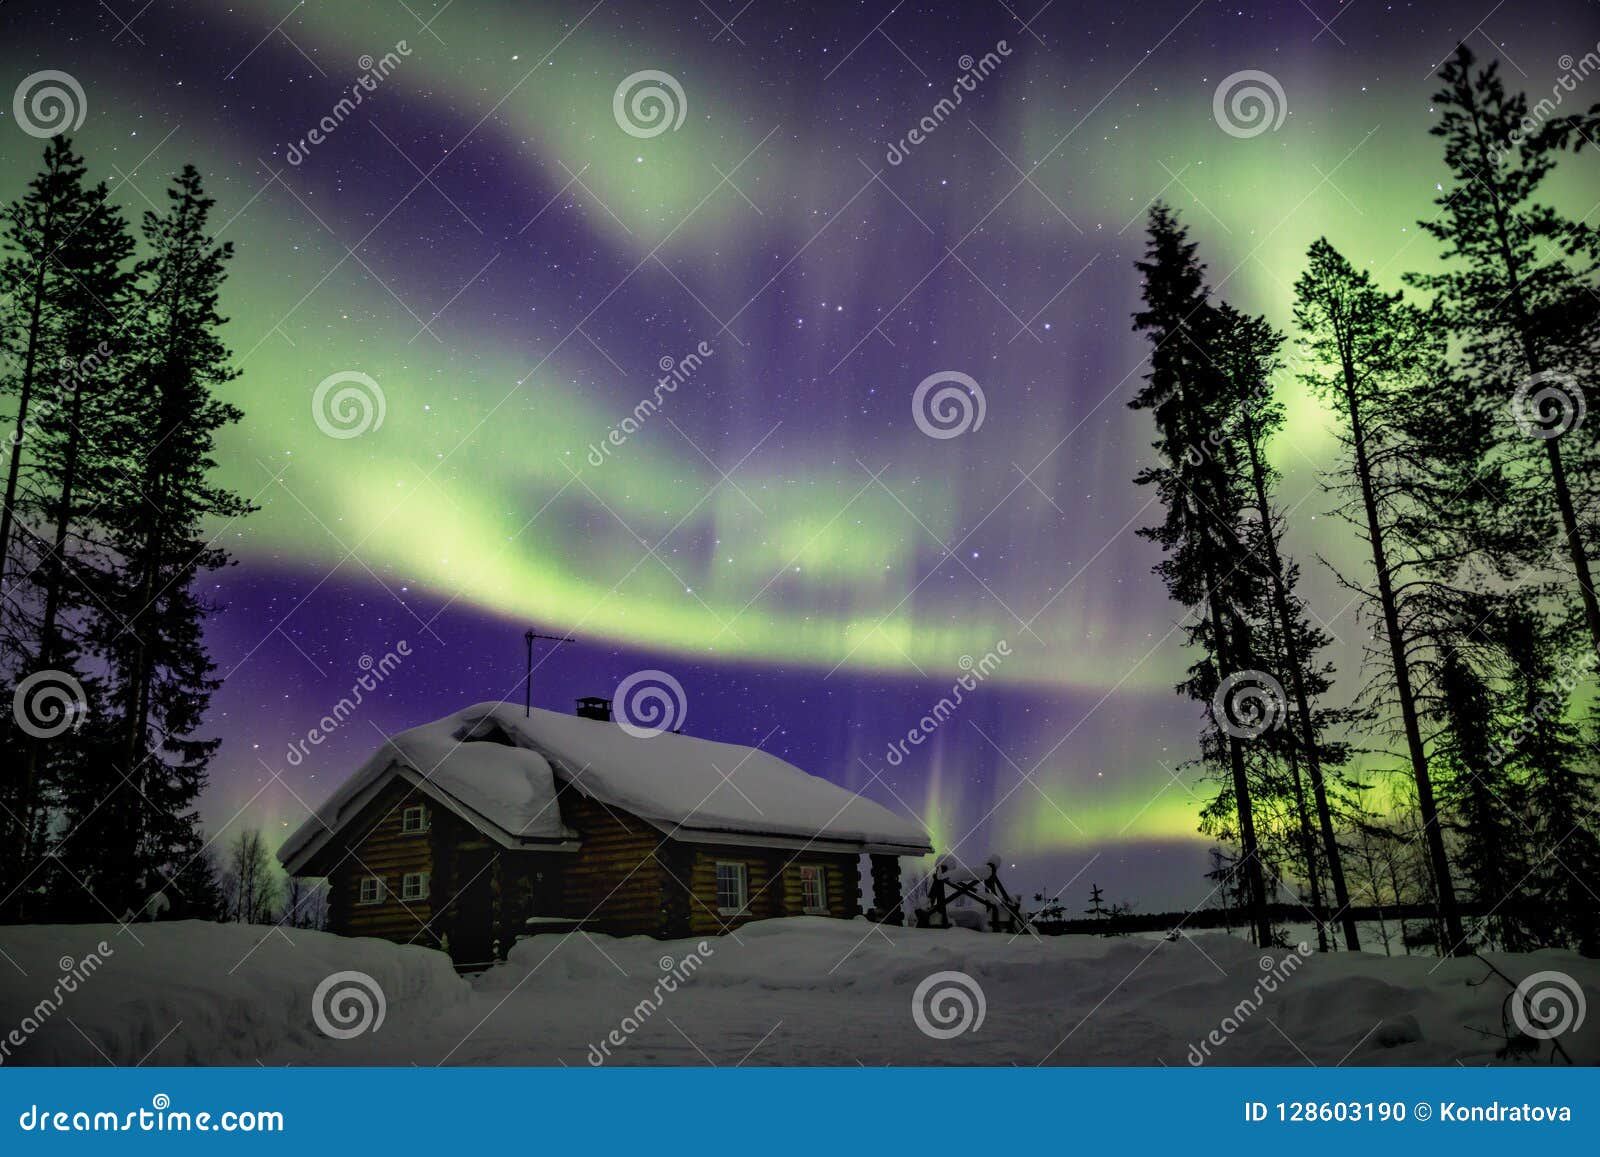 Beautiful Northern Lights Aurora Borealis In The Night Sky Over Winter Lapland Landscape Finland Scandinavia Stock Photo Image Of Finland Colorful